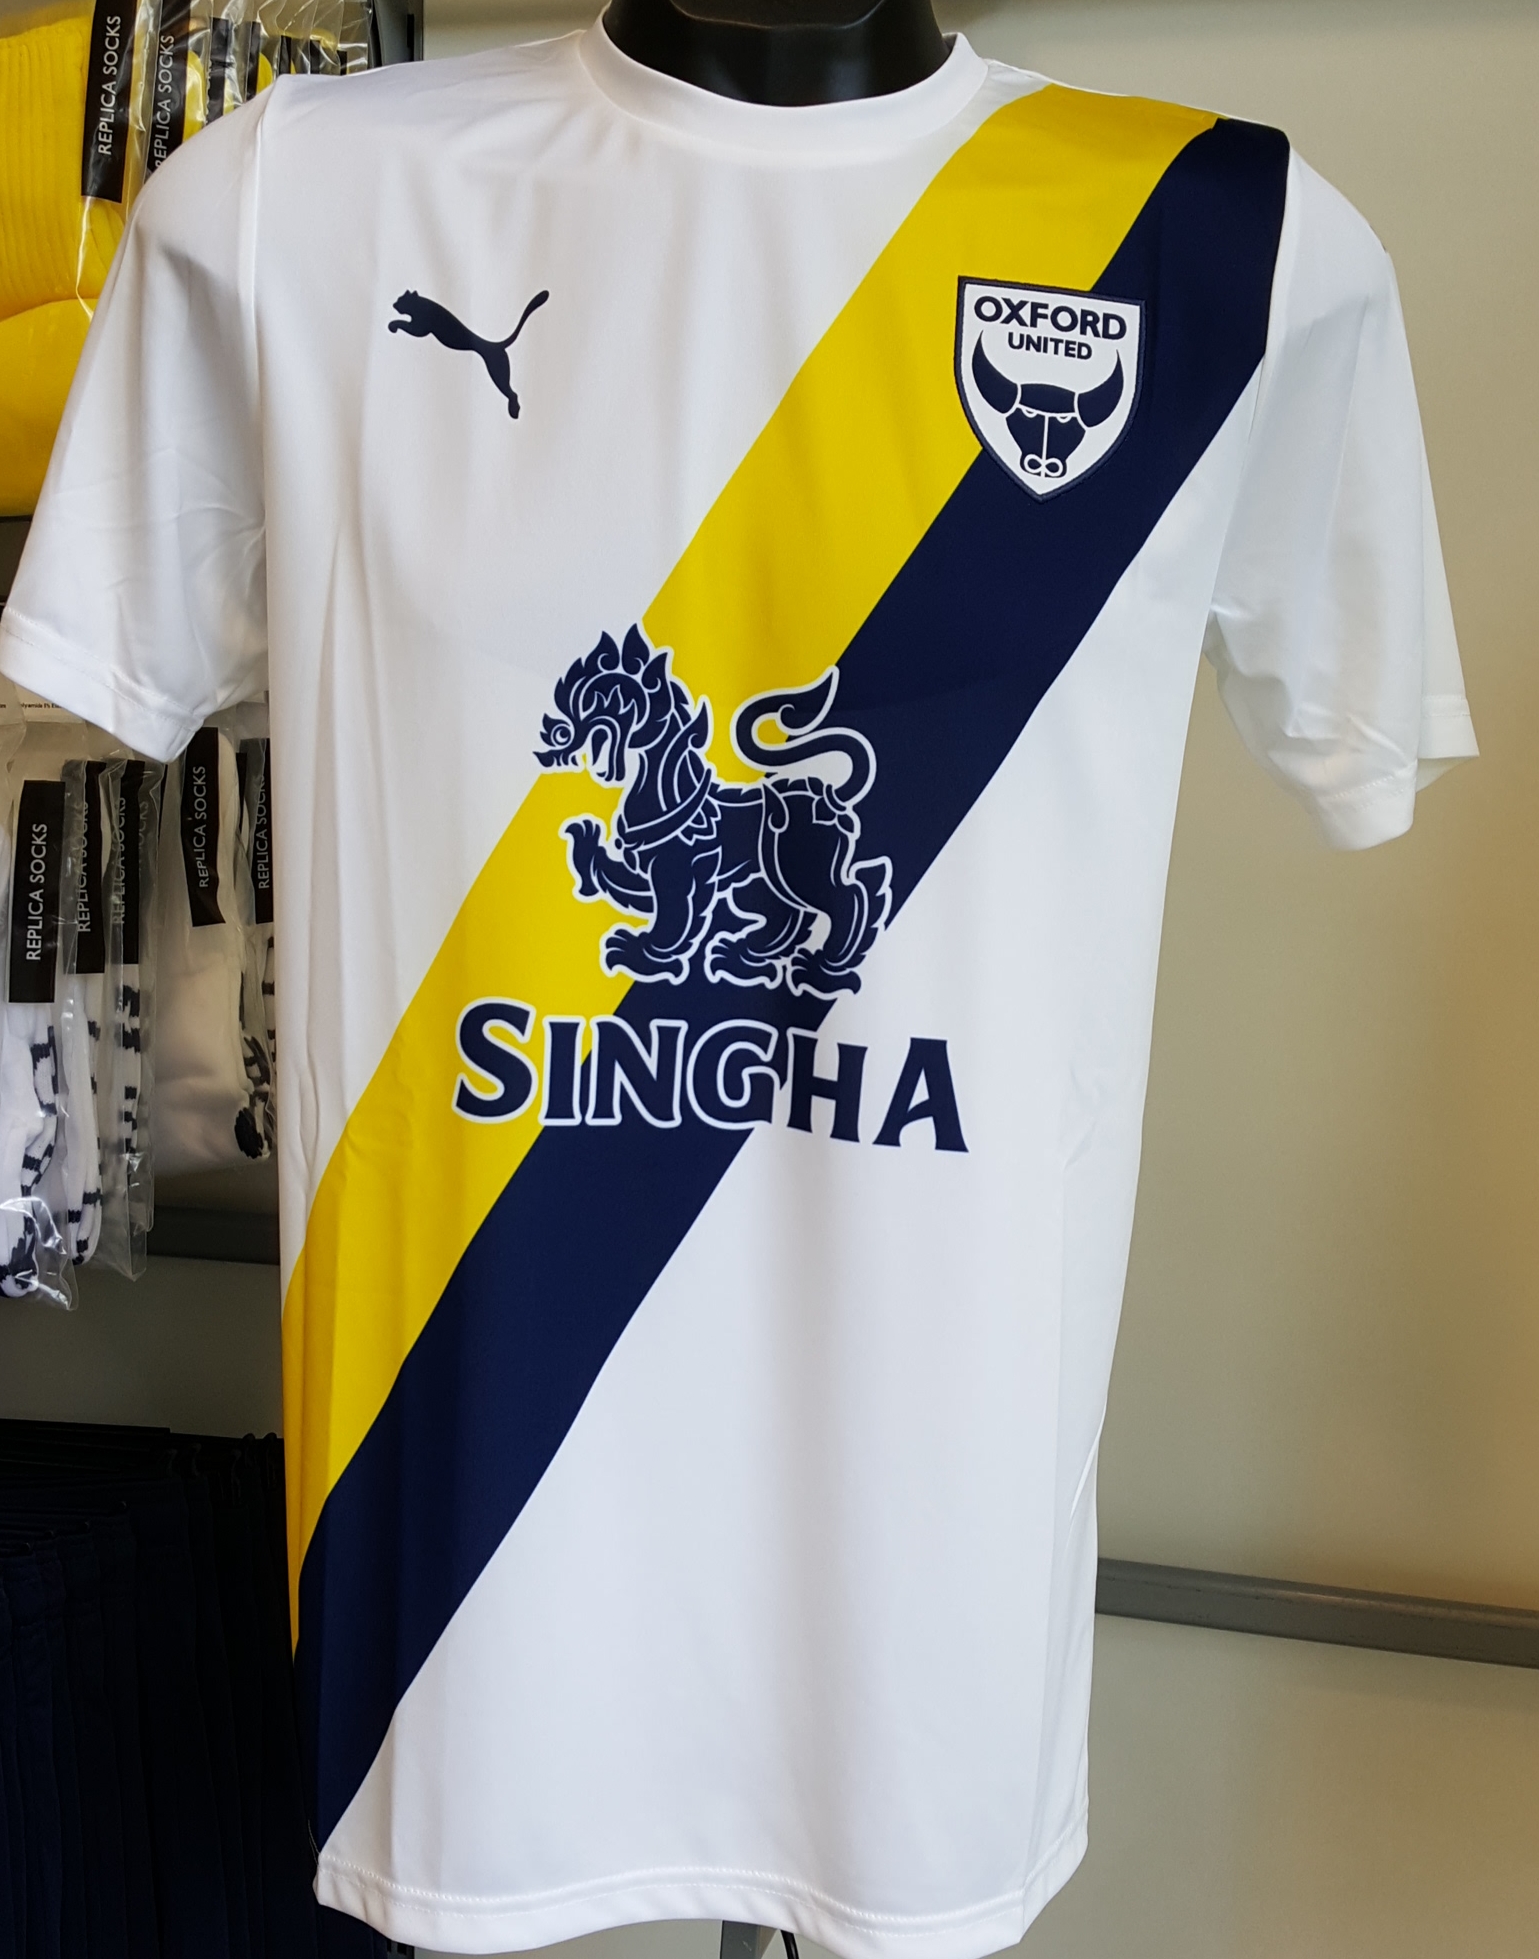 Oxford United unveil new away kit 